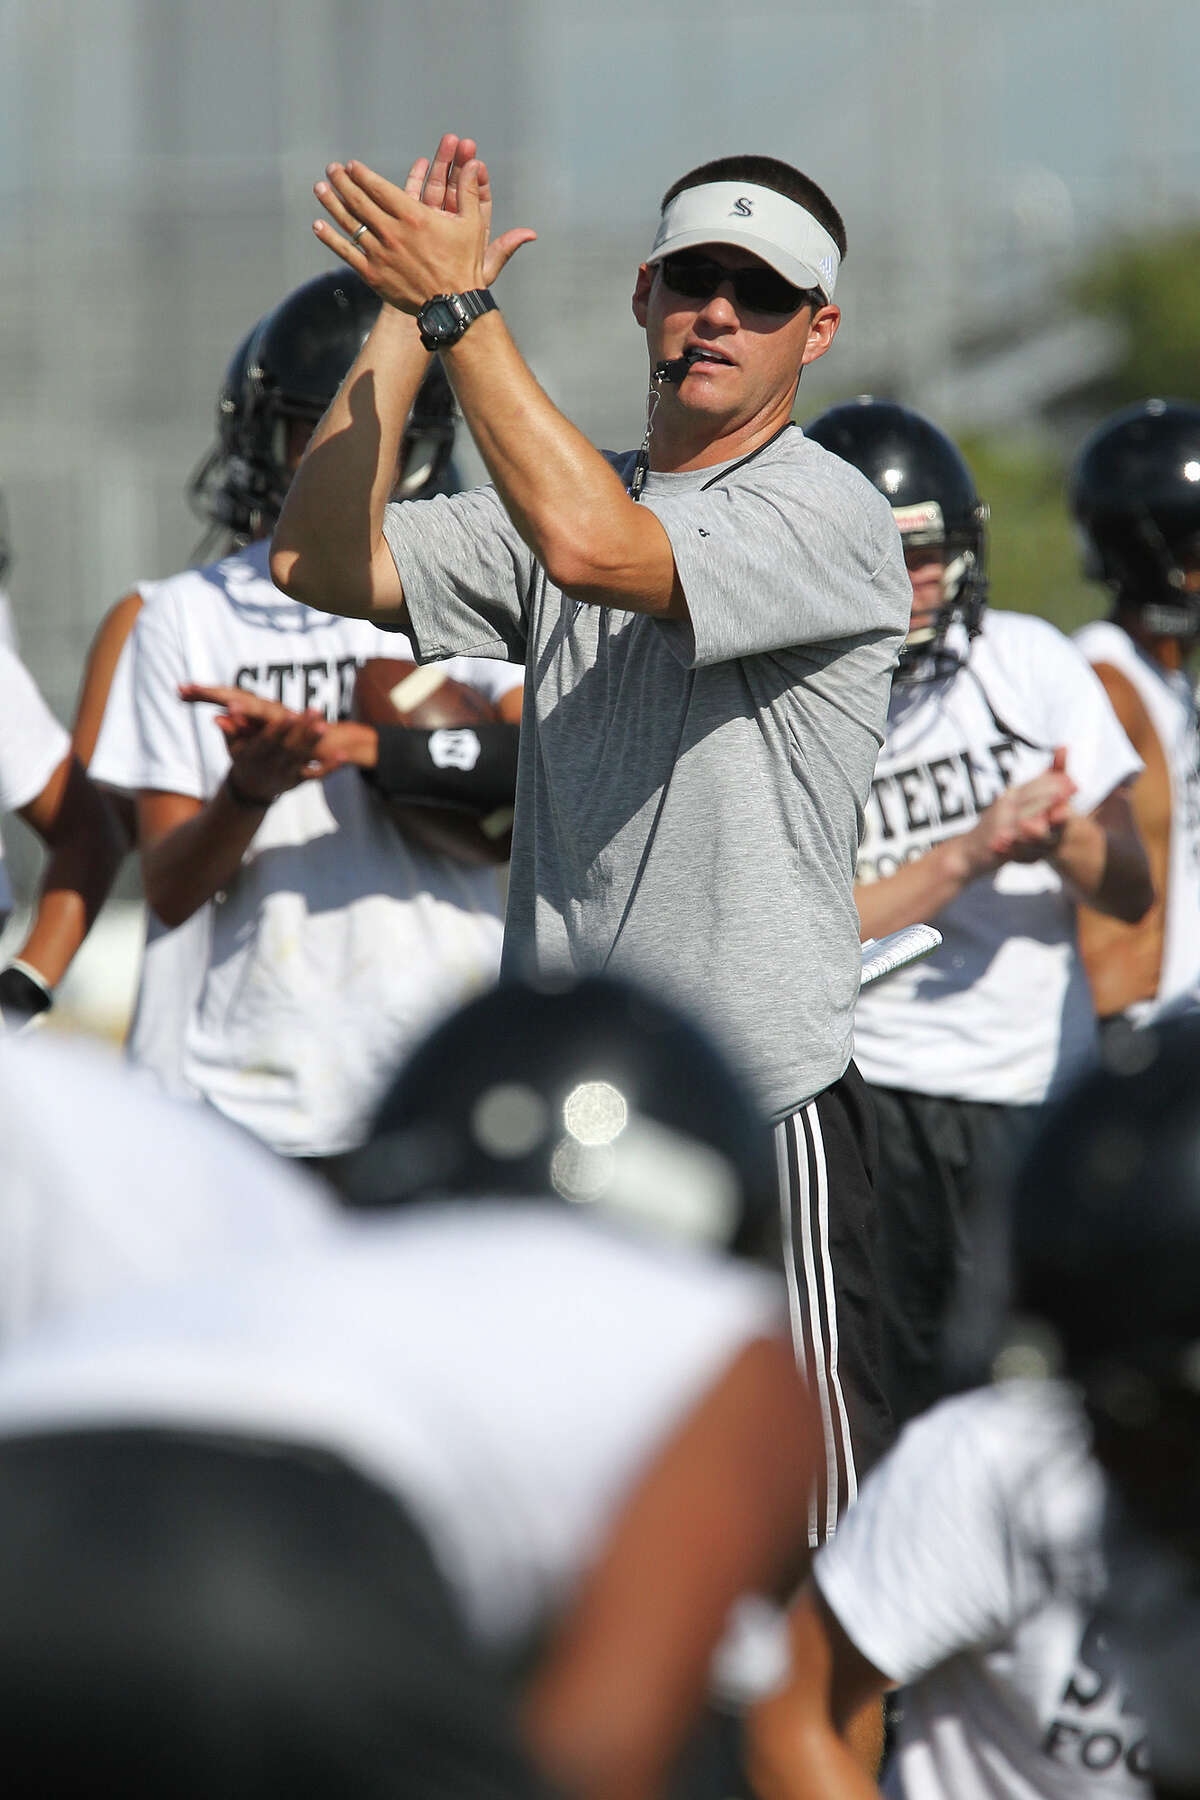 Steele High School Head Football Coach Scott Lehnhoff goes through the team's first practice of the season, Monday, Aug. 12, 2013. Lehnhoff took over the team after Mike Jinks left for Texas Tech University. The Knights have a 43-4 record in the past three years.